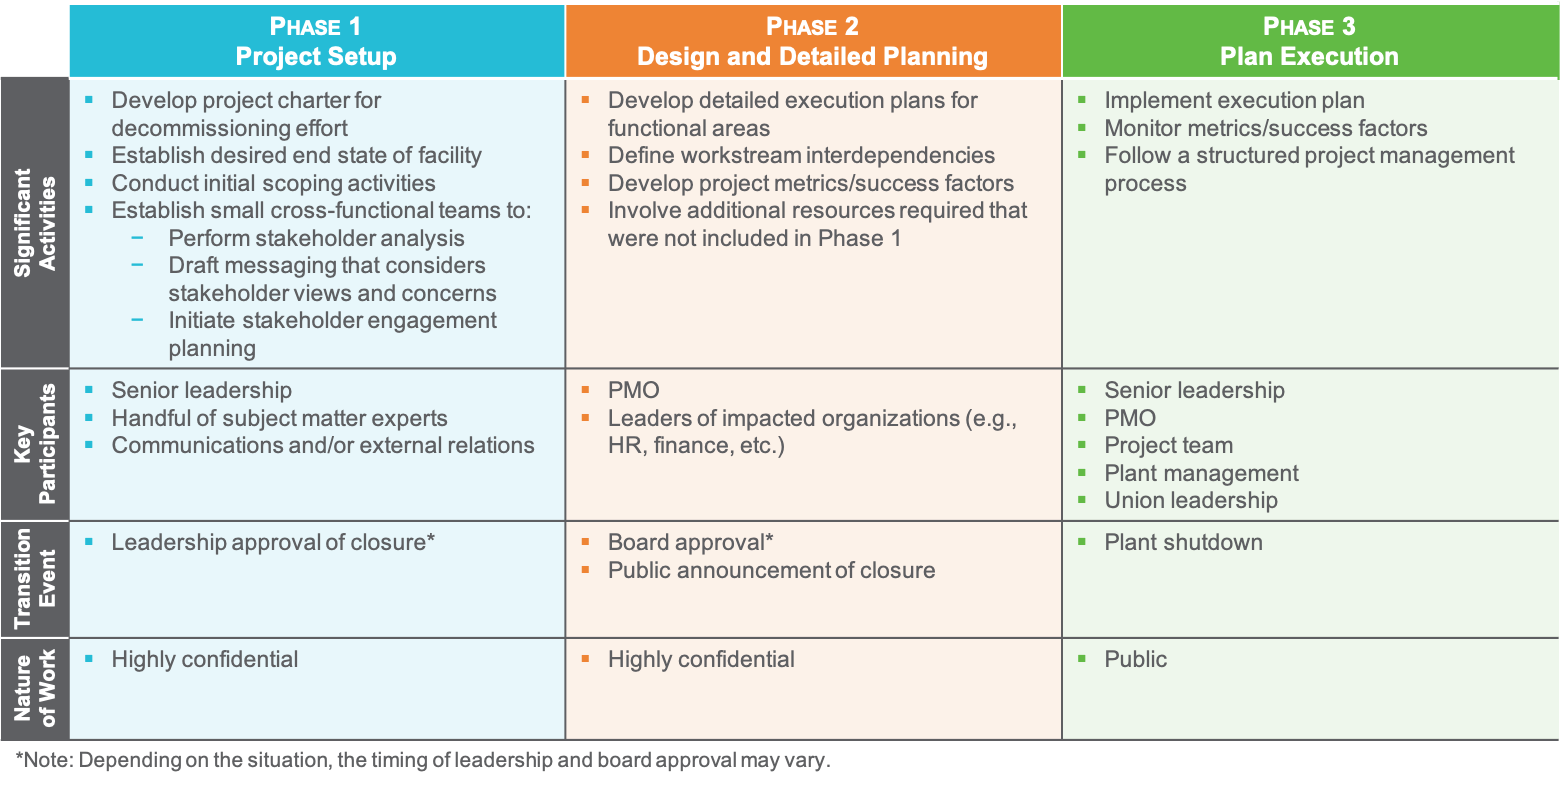  Diagram describing the 3 phases of a coal power plant decommissioning: Project setup, Design and Detailed Planning, Plan Execution